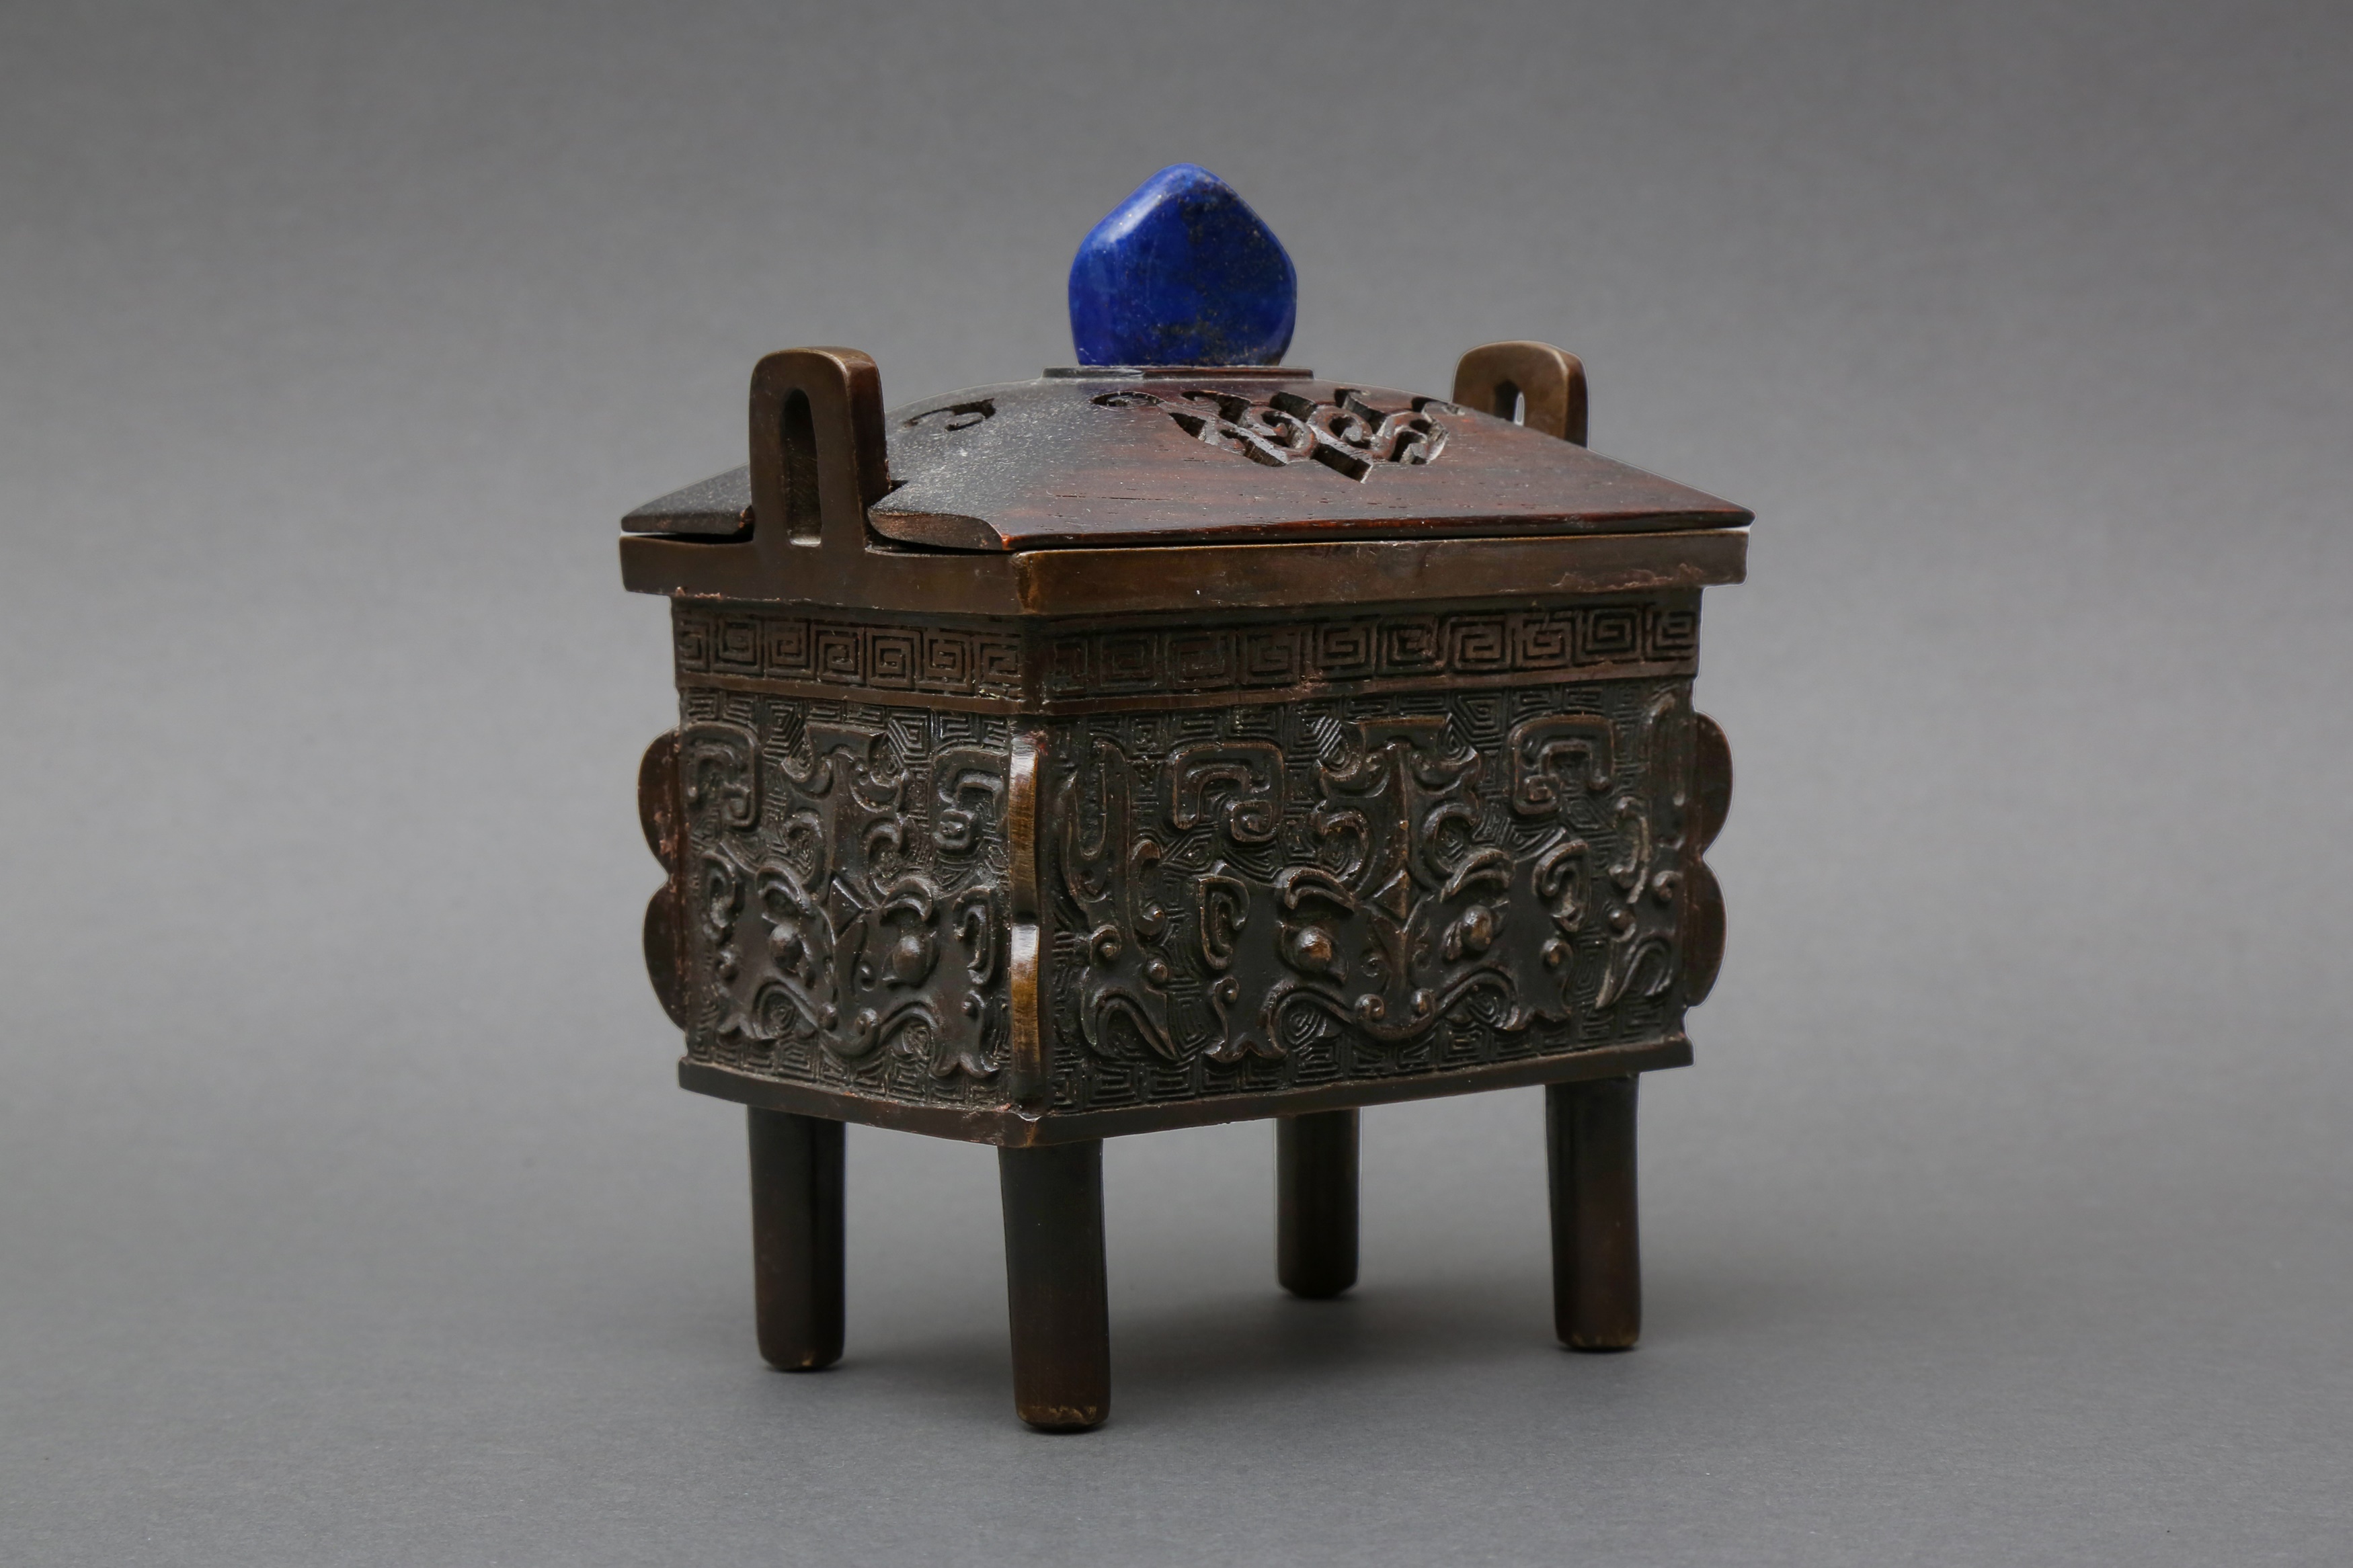 A CHINESE BRONZE CENSER AND COVER WITH LAPIS LAZULI FINIAL 清十八至十九世紀 銅饕餮紋青金岩鈕方鼎 - Image 2 of 2